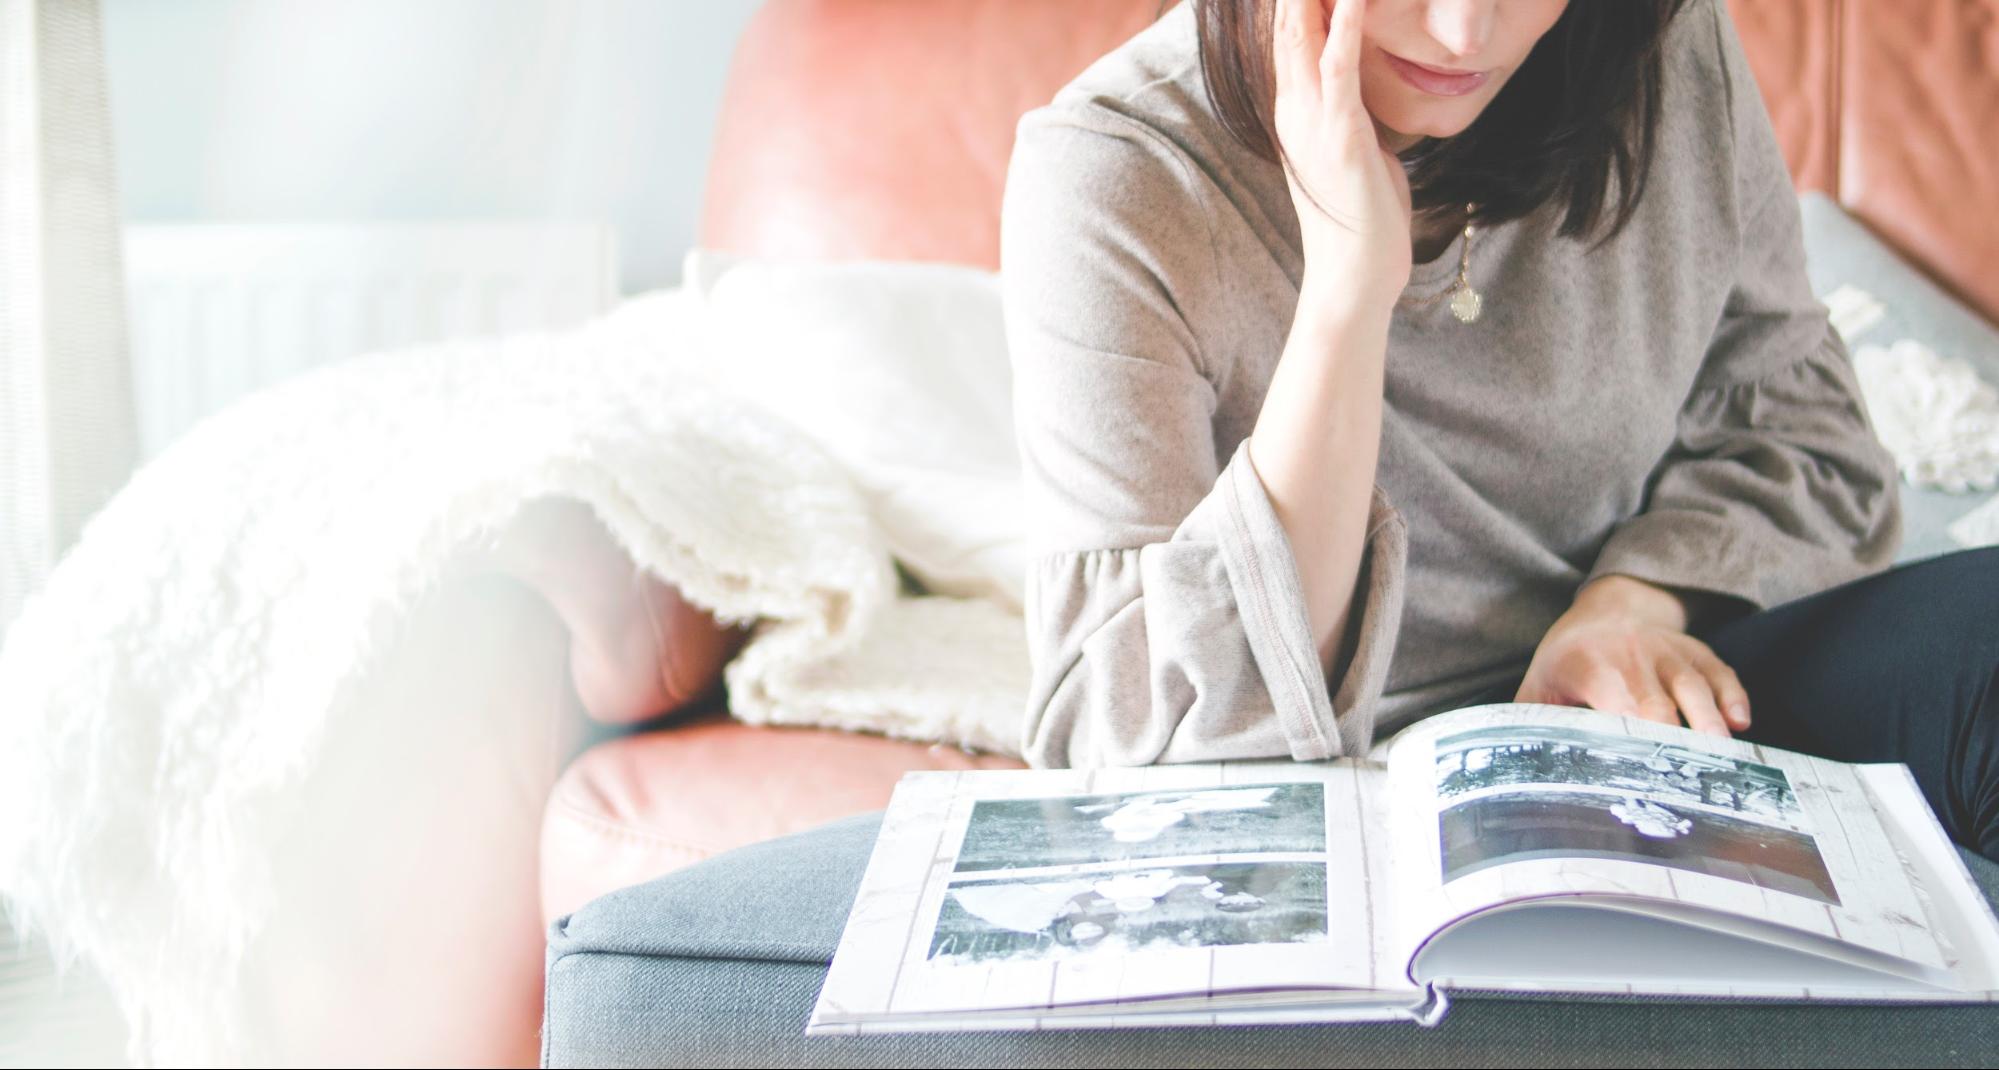 A woman sitting on a couch reading a wedding photo book.